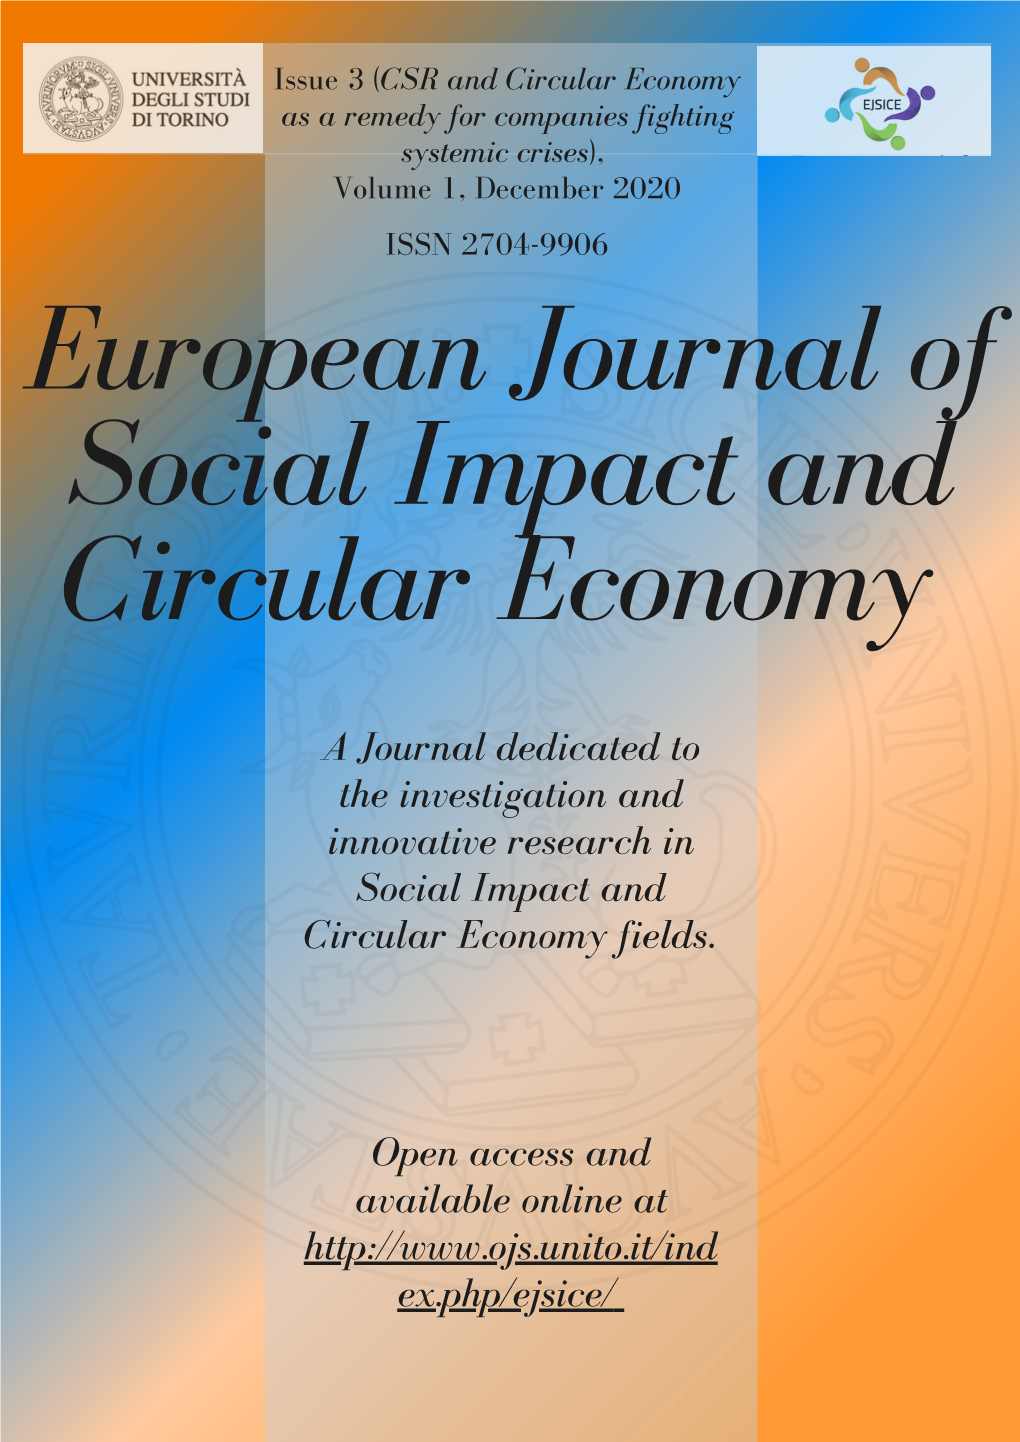 A Journal Dedicated to the Investigation and Innovative Research in Social Impact and Circular Economy Fields